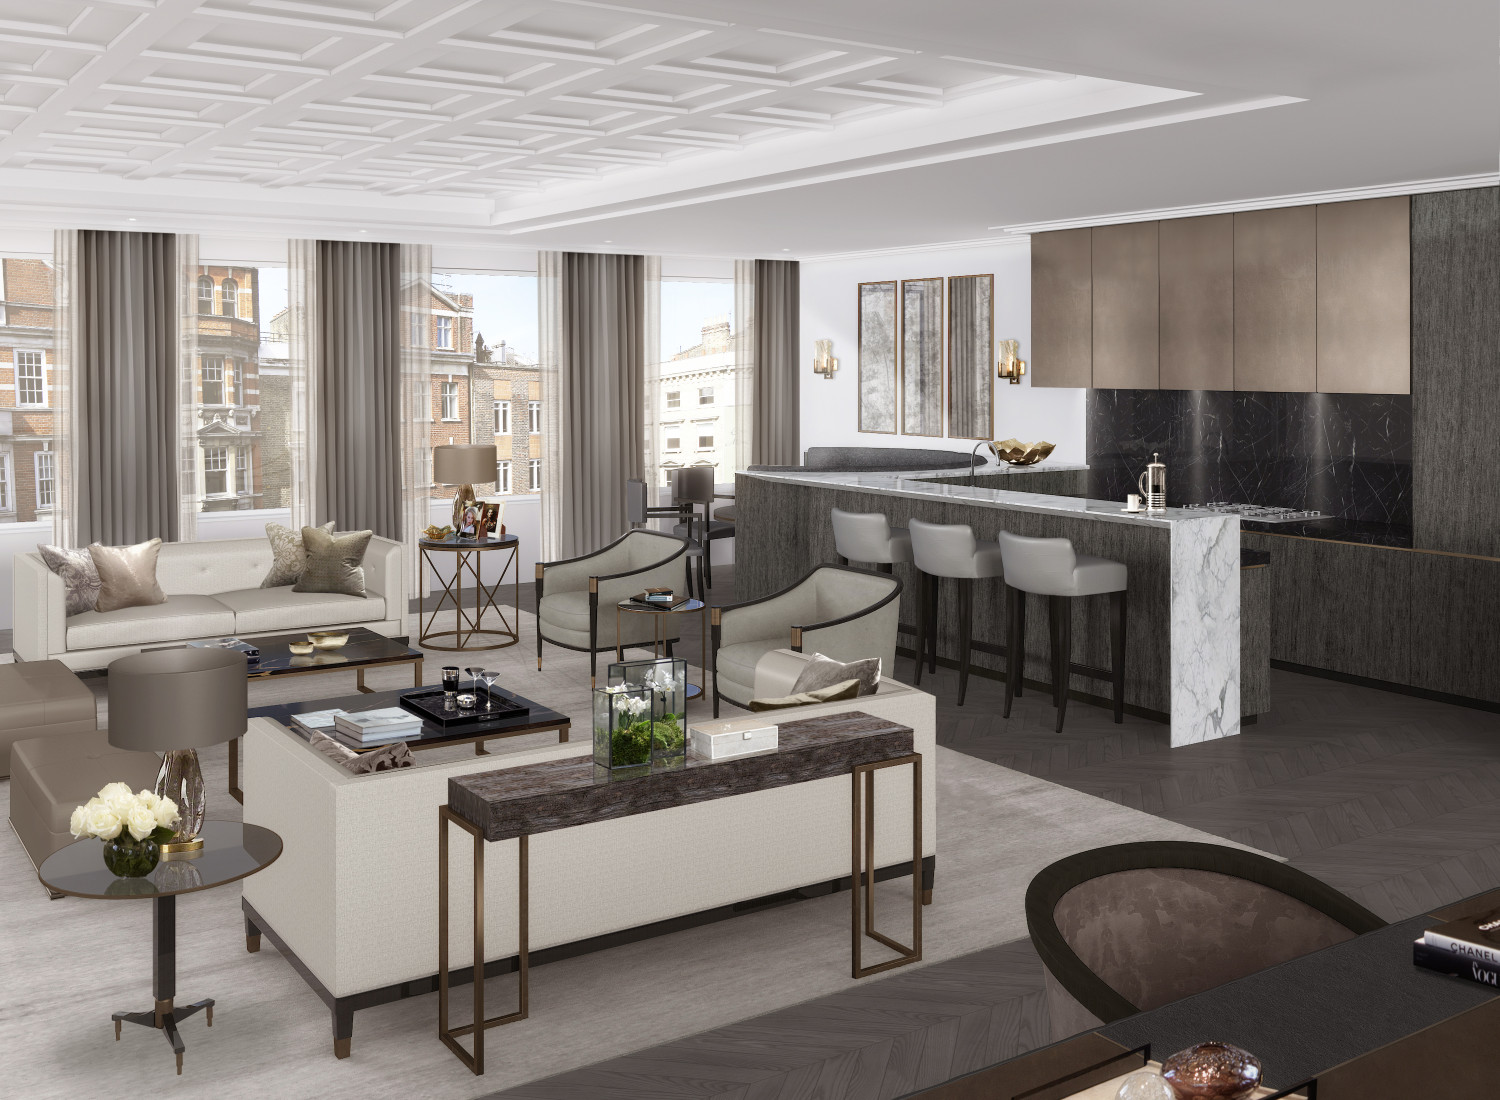 The W1 London Boutique Residences Exuding Character And